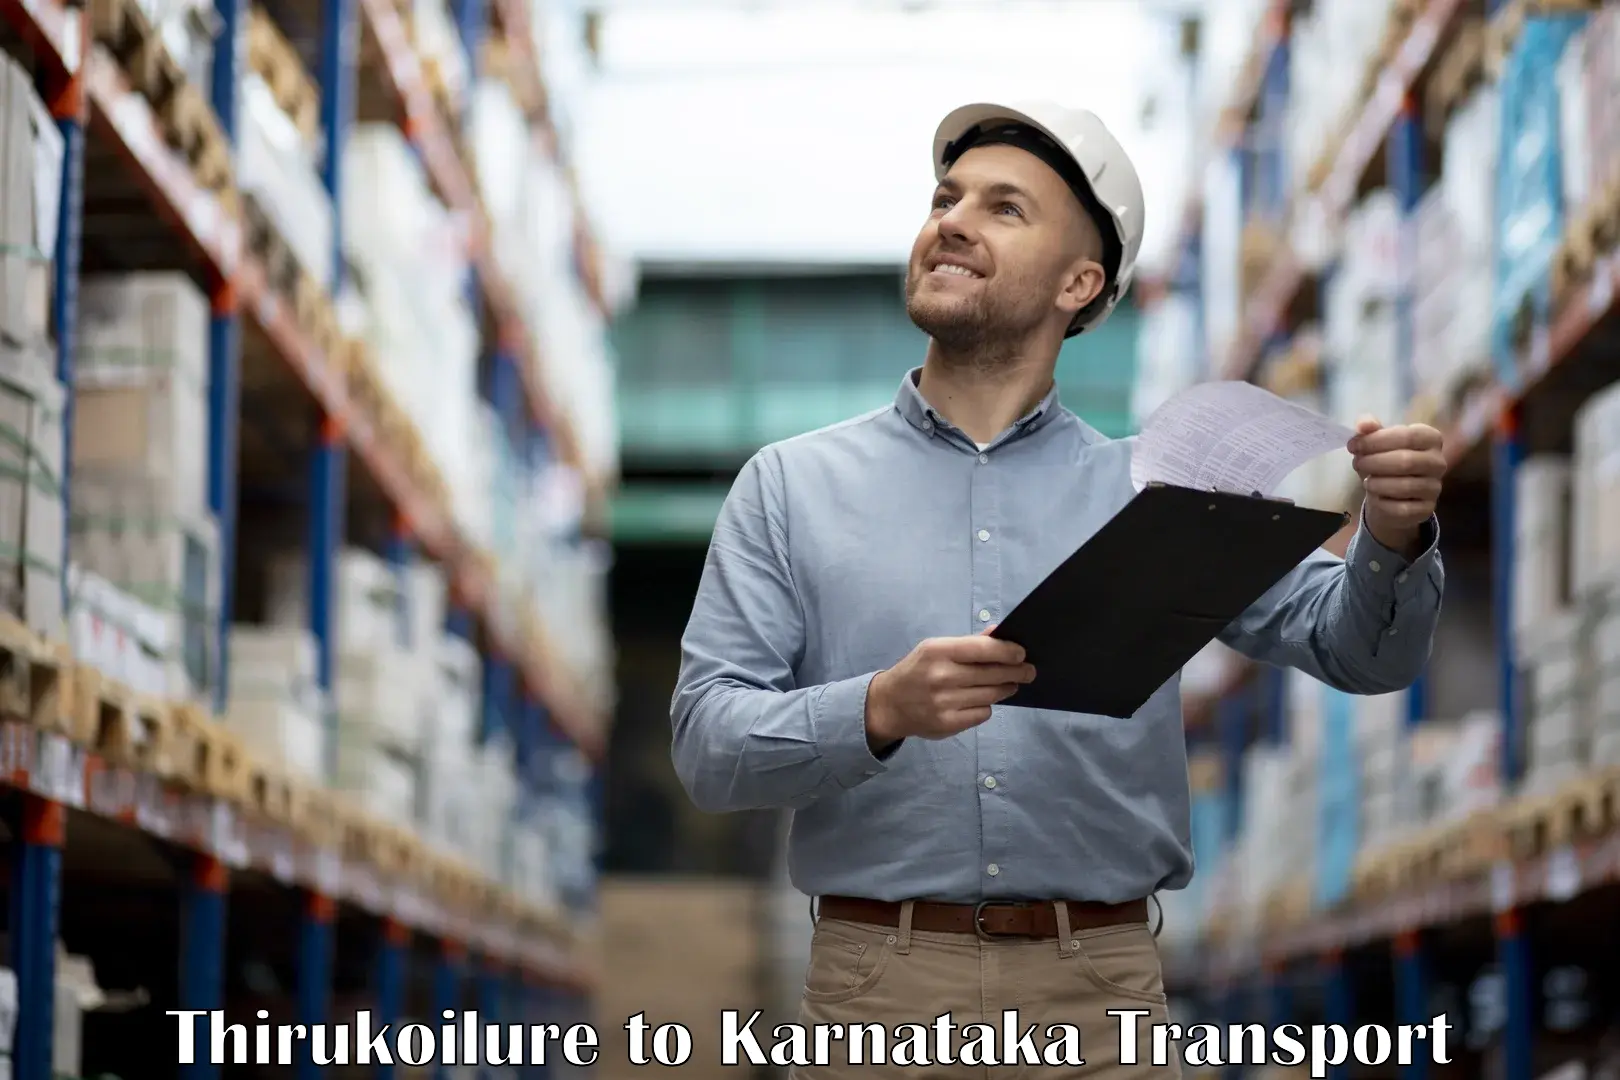 Goods delivery service Thirukoilure to Eedu